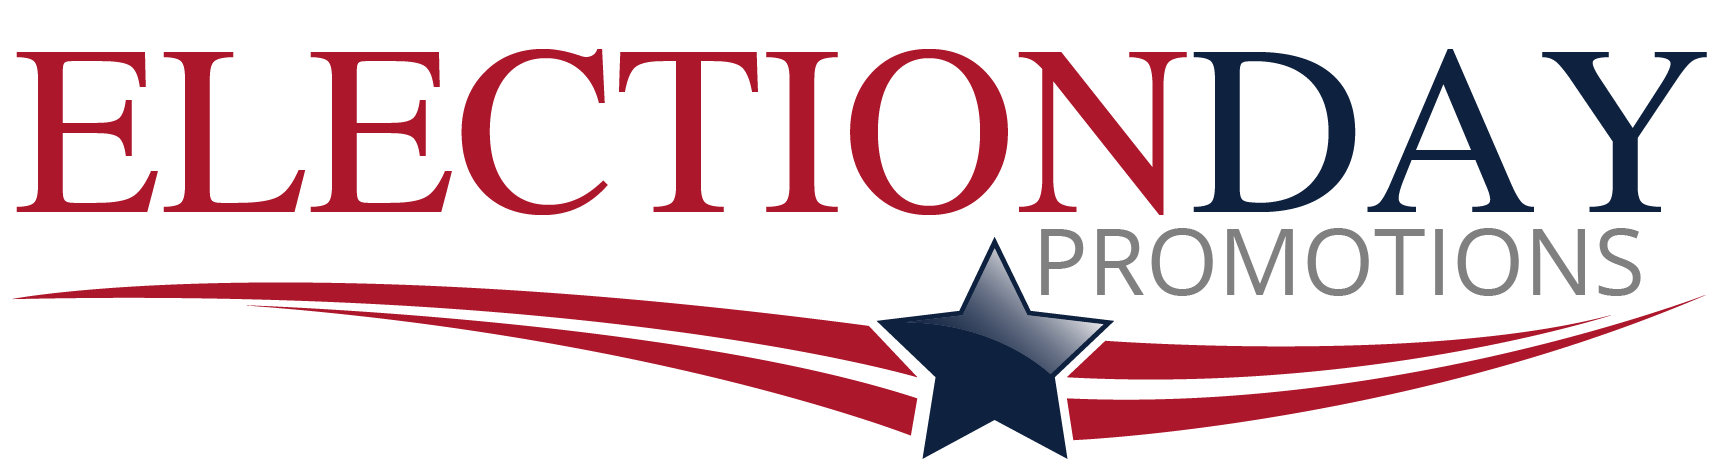 Election Day Promotions Company Logo